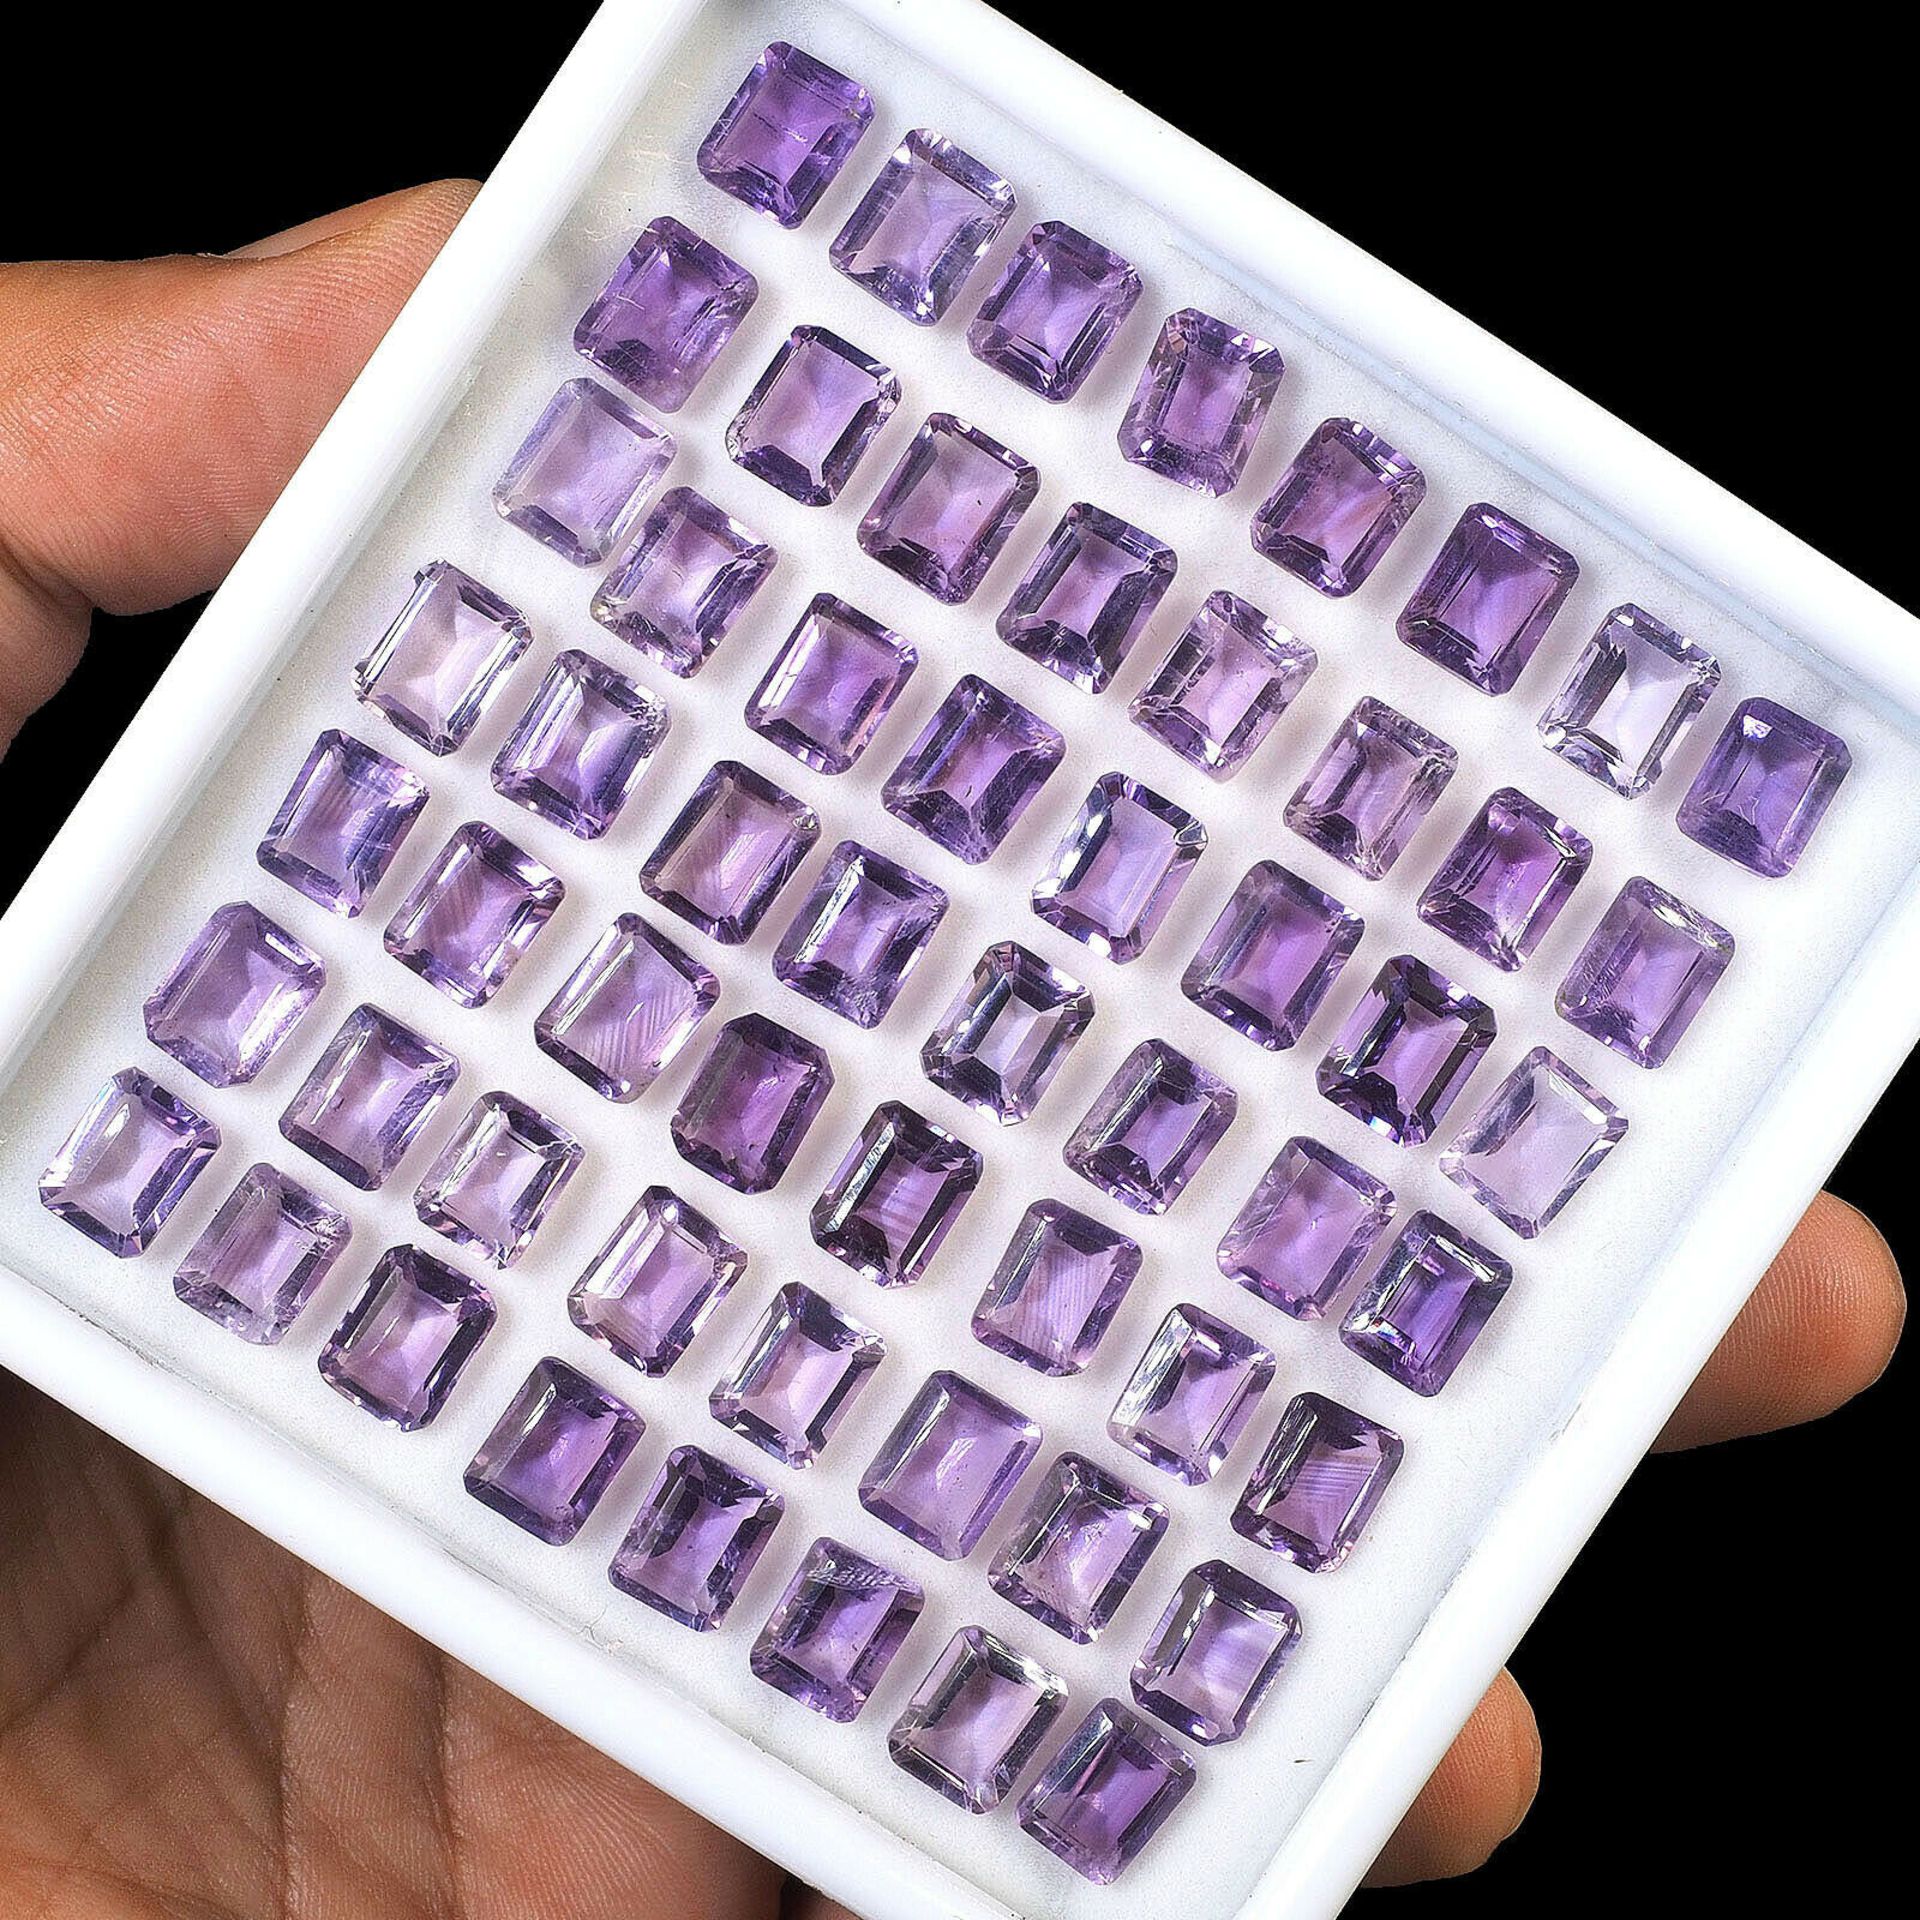 Natural Amethyst - 123.60 Carats - 72 pieces - size 8.5mm /9.00mm - average retail value £ 16,312.08